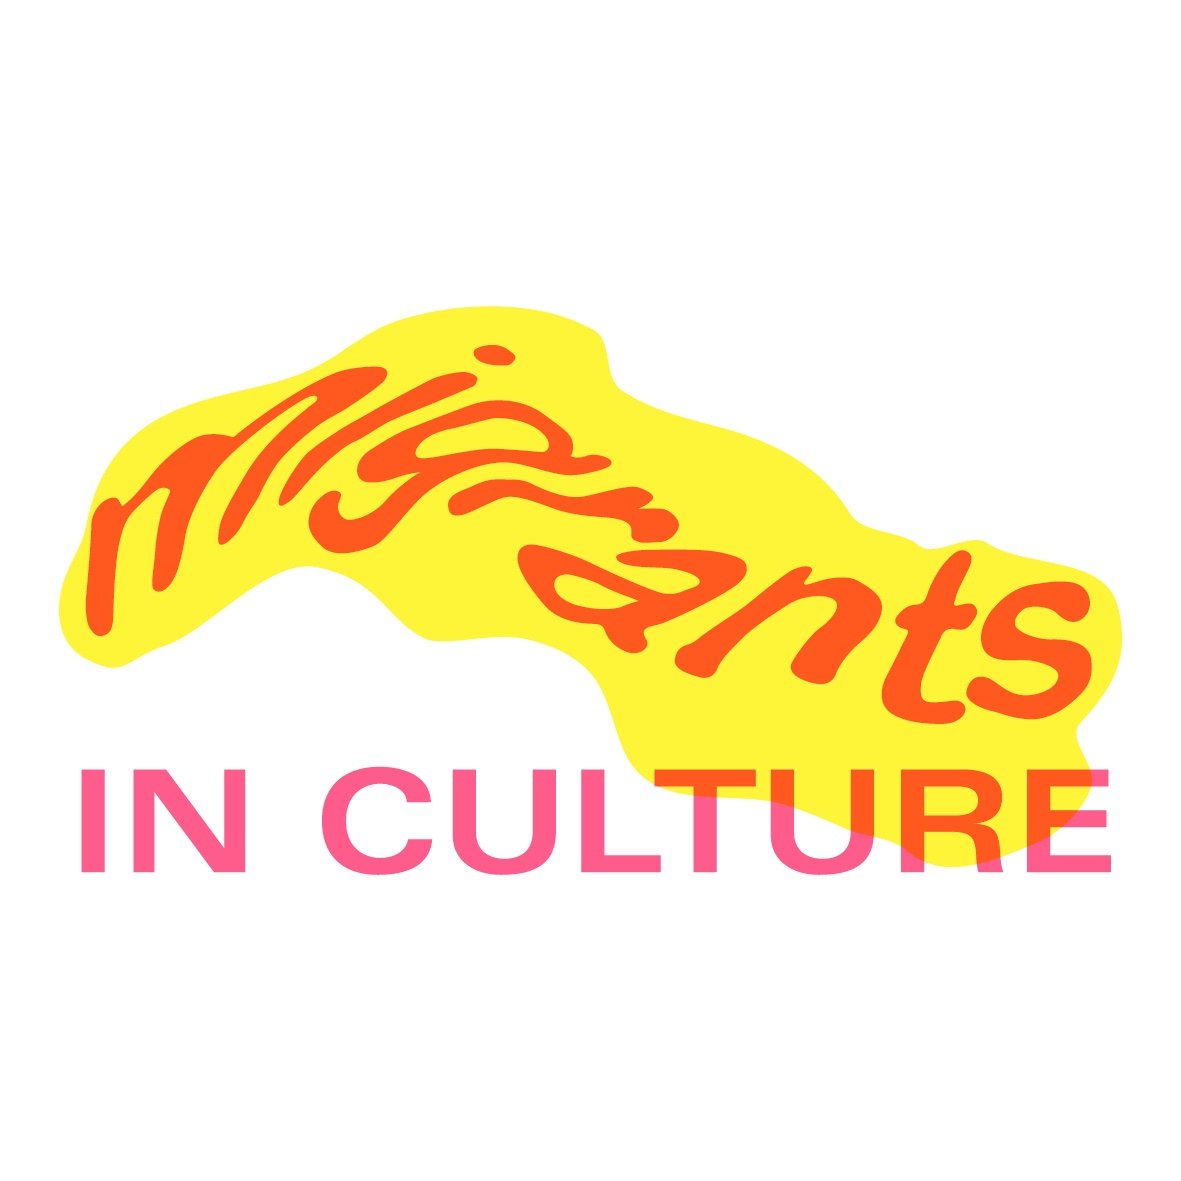 Migrants In Culture is a migrant-led design agency. We resource artists & organisers to build more more creative & powerful social movements.